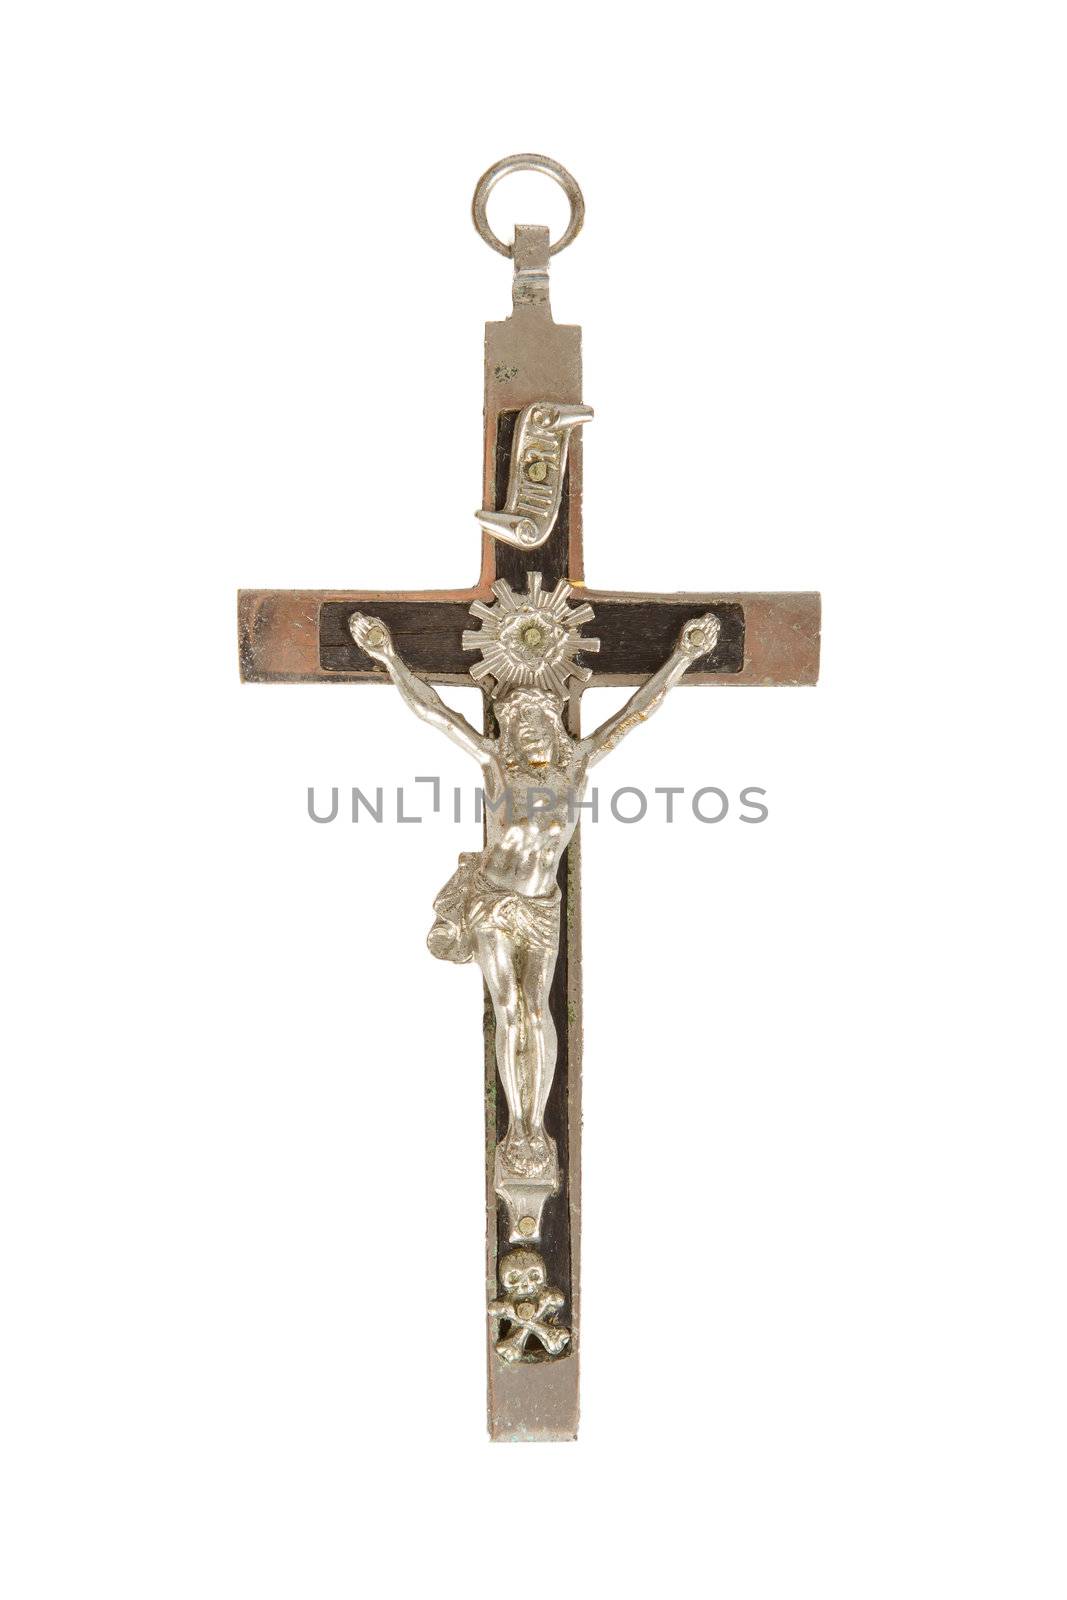 Silver christian cross, isolated on a white background